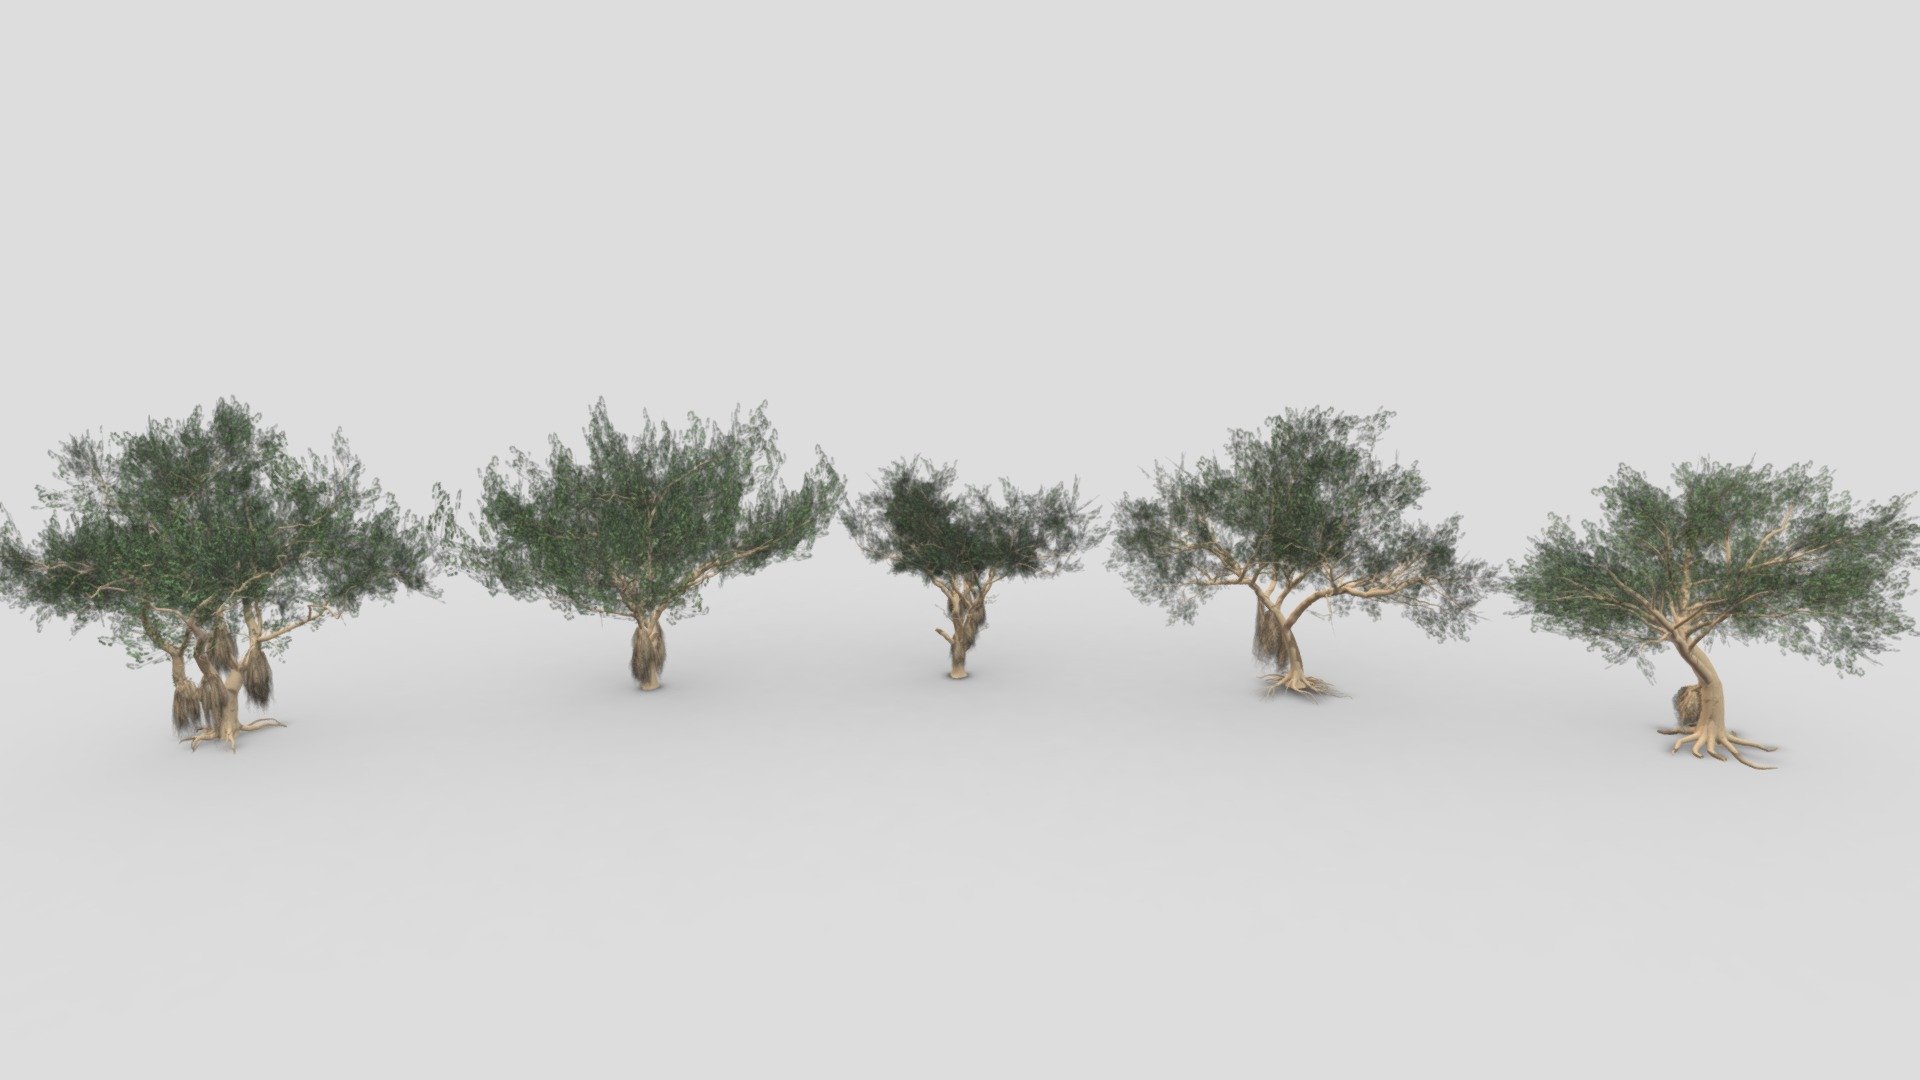 This file includes a collection of 5 3D Models of the Ficus Benjamina Tree.

Note; This is the Third collection of Ficus Benjamina Tree.

Ficus Benjamina Tree-S11: https://sketchfab.com/3d-models/ficus-benjamina-tree-s11-21cf0521cbce42b9a944042d88df9122

Ficus Benjamina Tree-S12: https://sketchfab.com/3d-models/ficus-benjamina-tree-s12-b69d440a169c4c30b395cddda2b33c83

Ficus Benjamina Tree-S13: https://sketchfab.com/3d-models/ficus-benjamina-tree-s13-af00ea335b1d4be4bfbbaef921d4c87a

Ficus Benjamina Tree-S14: https://sketchfab.com/3d-models/ficus-benjamina-tree-s14-f3180f1d68184127b315fa7d35ffcb20

Ficus Benjamina Tree-S15: https://sketchfab.com/3d-models/ficus-benjamina-tree-s15-090a507261da4a0abf83b9eadb348913 - Ficus Benjamina Tree- Pack 03 - Buy Royalty Free 3D model by ASMA3D 3d model